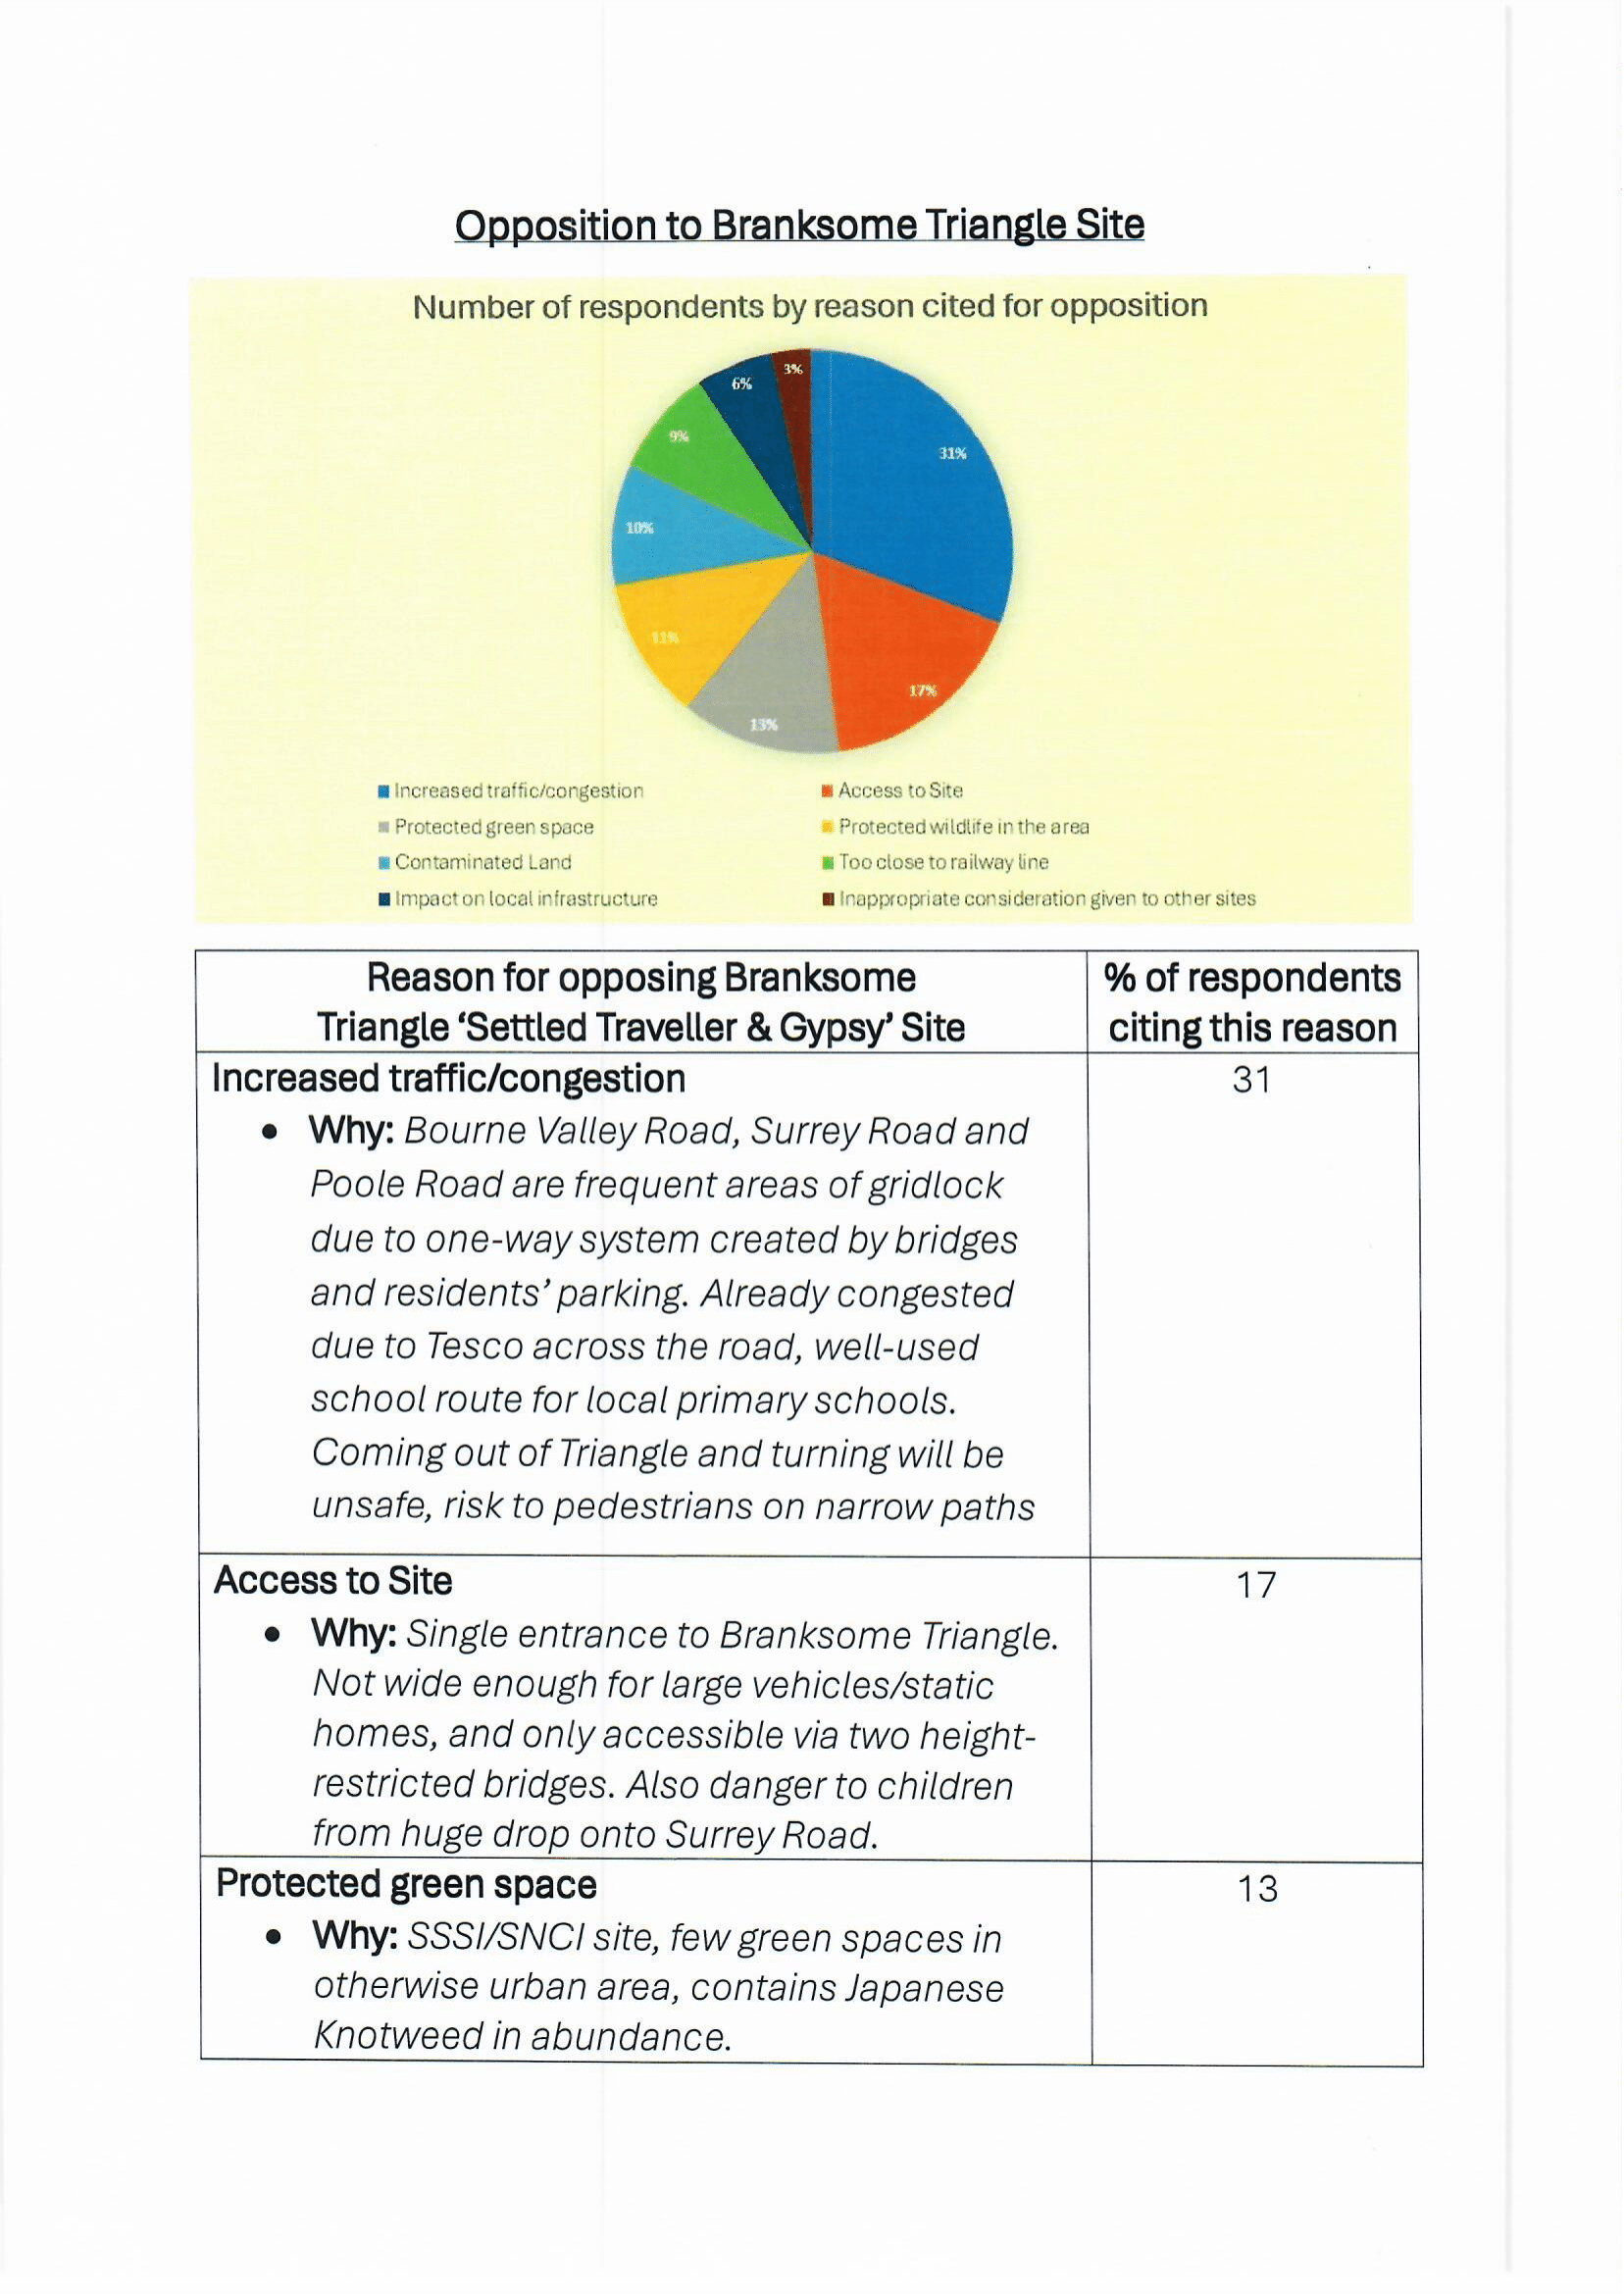 Analysis of Constituent Views Page 2